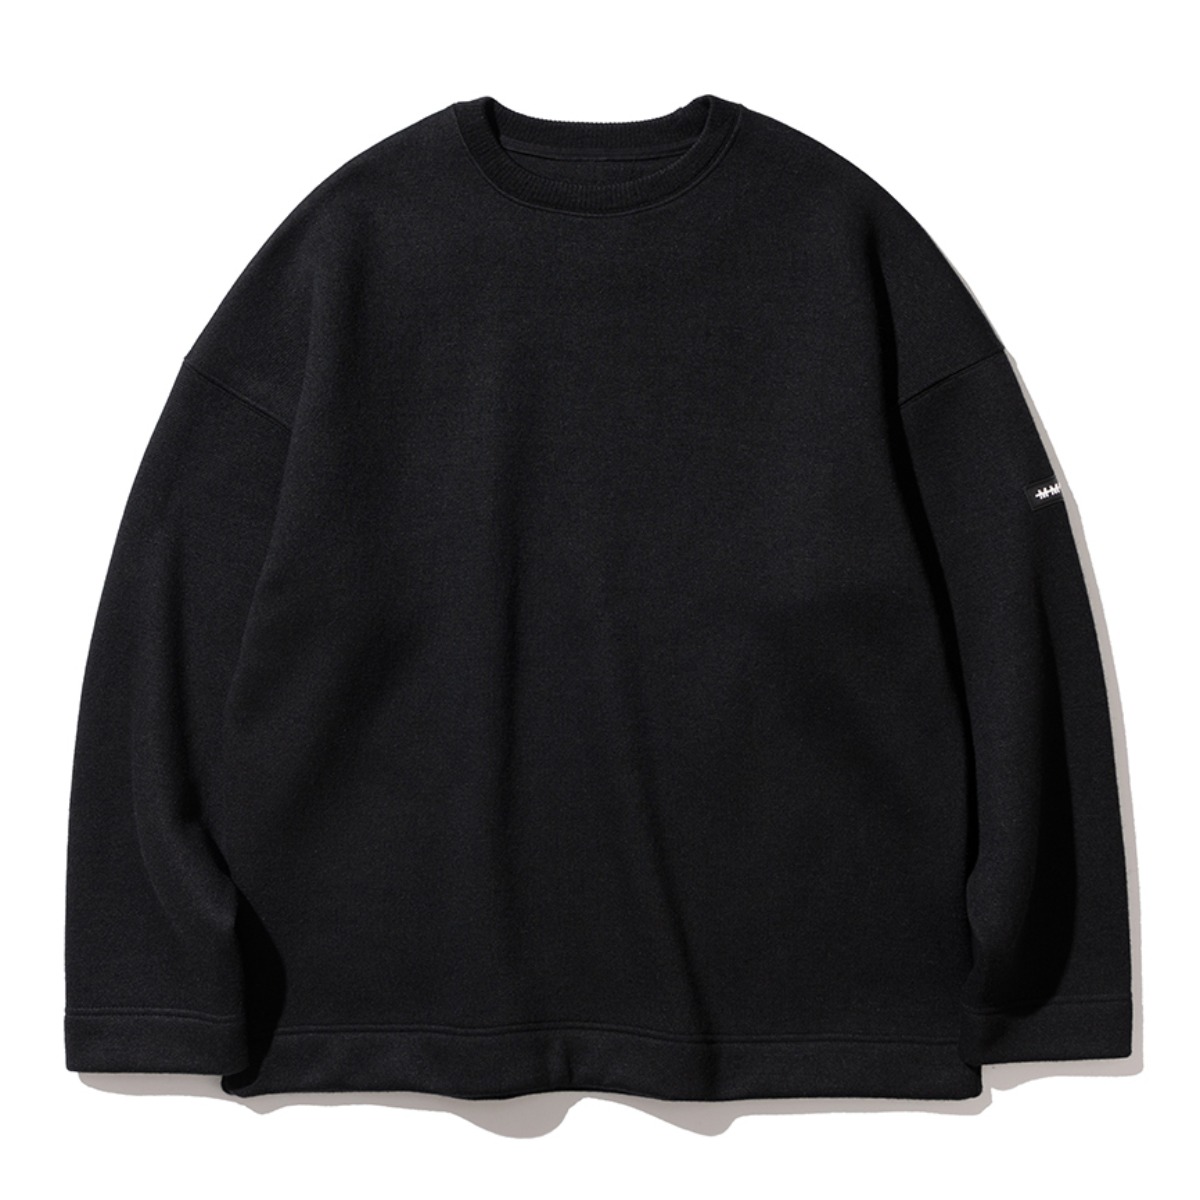 SDDL SIGNATURE PATCH DT OVER WOOL SWEAT SHIRT #1(1차 재입고)